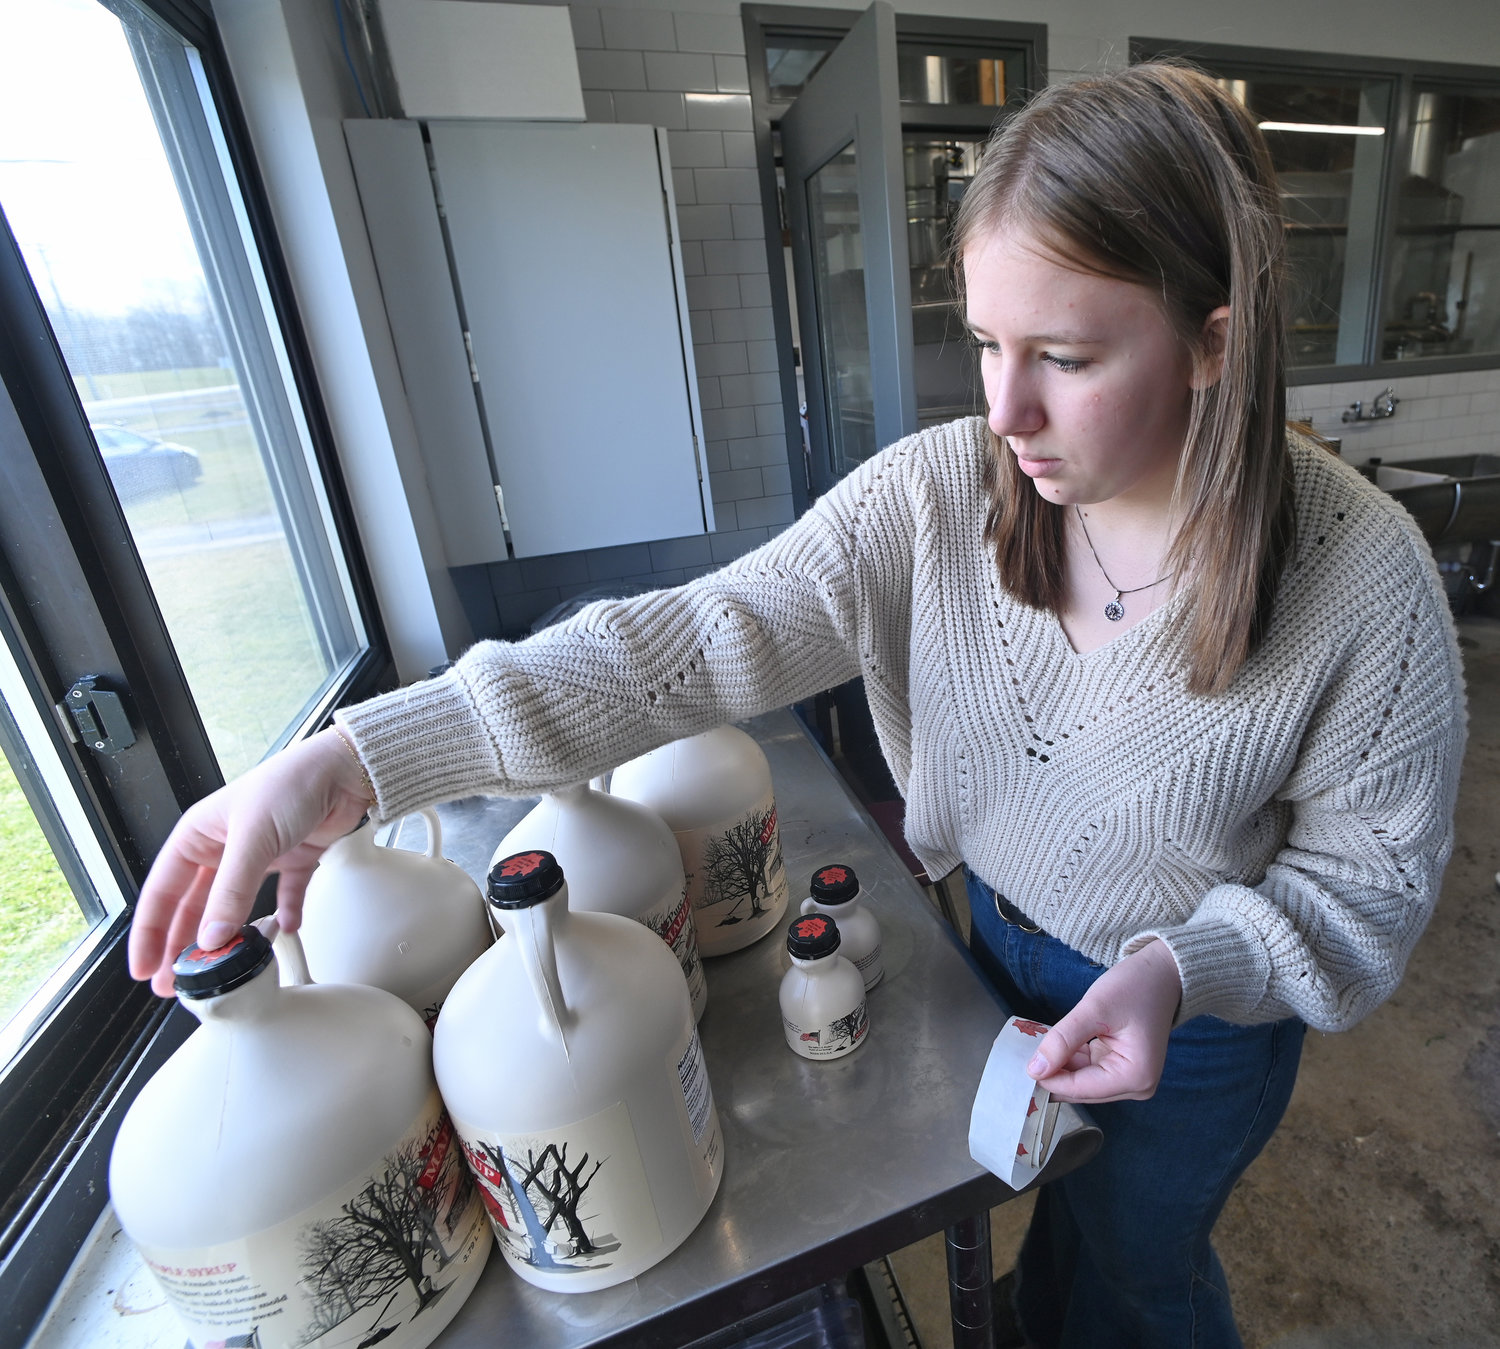 Stockbridge Valley Central School junior Madison Nolley puts stickers on jugs of maple syrup produced by the Stockbridge Valley FFA Wednesday, Feb. 15 in their sap house in Munnsville.